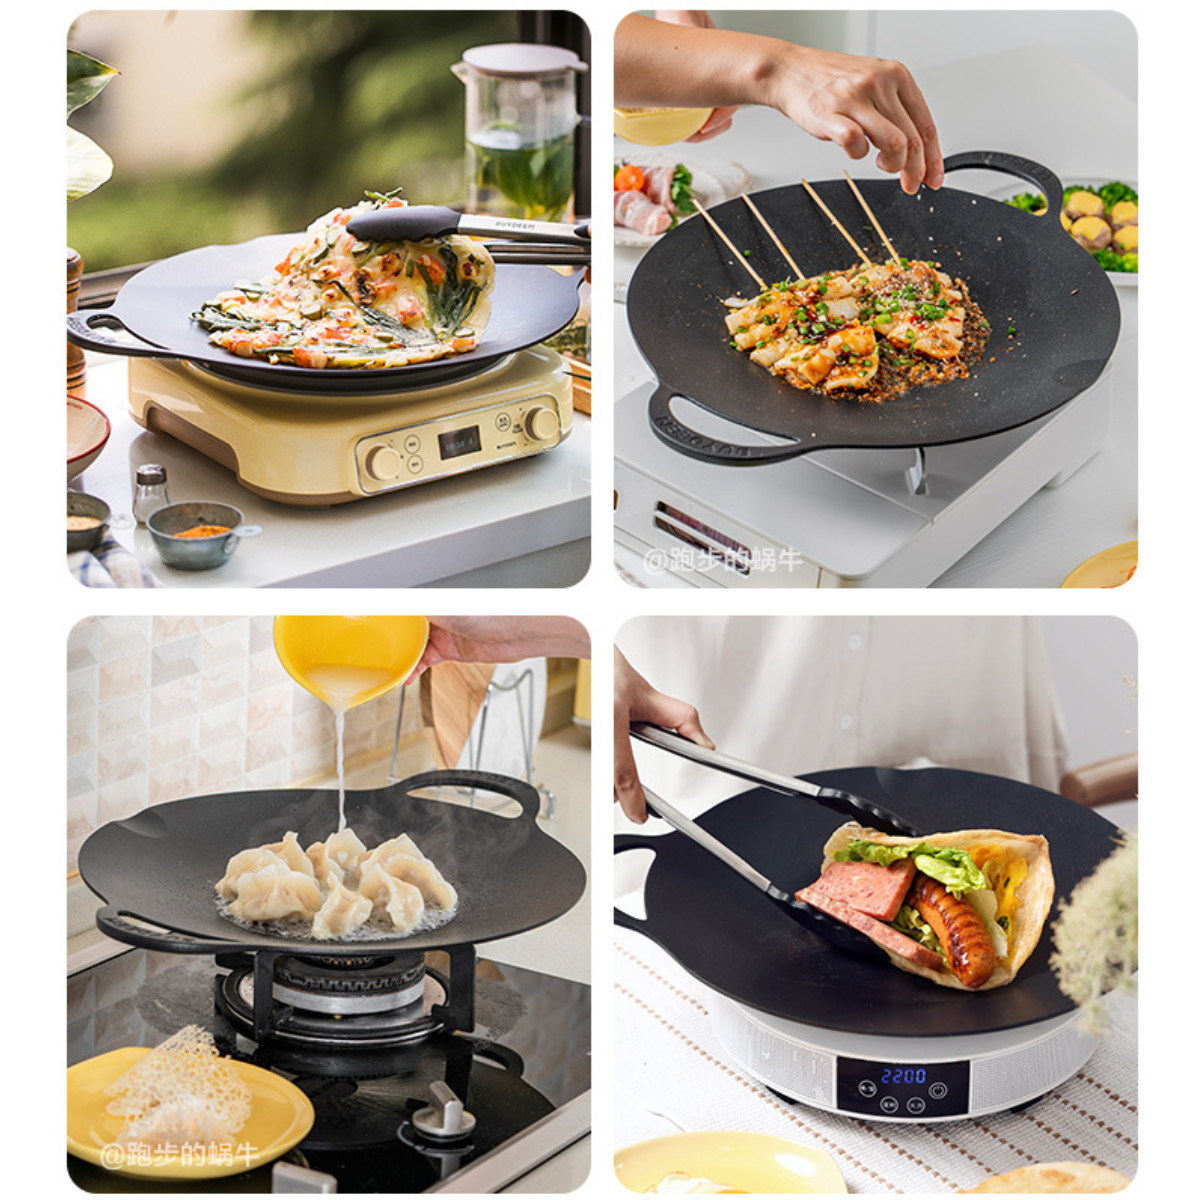 BUYDEEM Grill Pan Nonstick 36cm Round BBQ Griddle Indoor or Outdoor Cooking